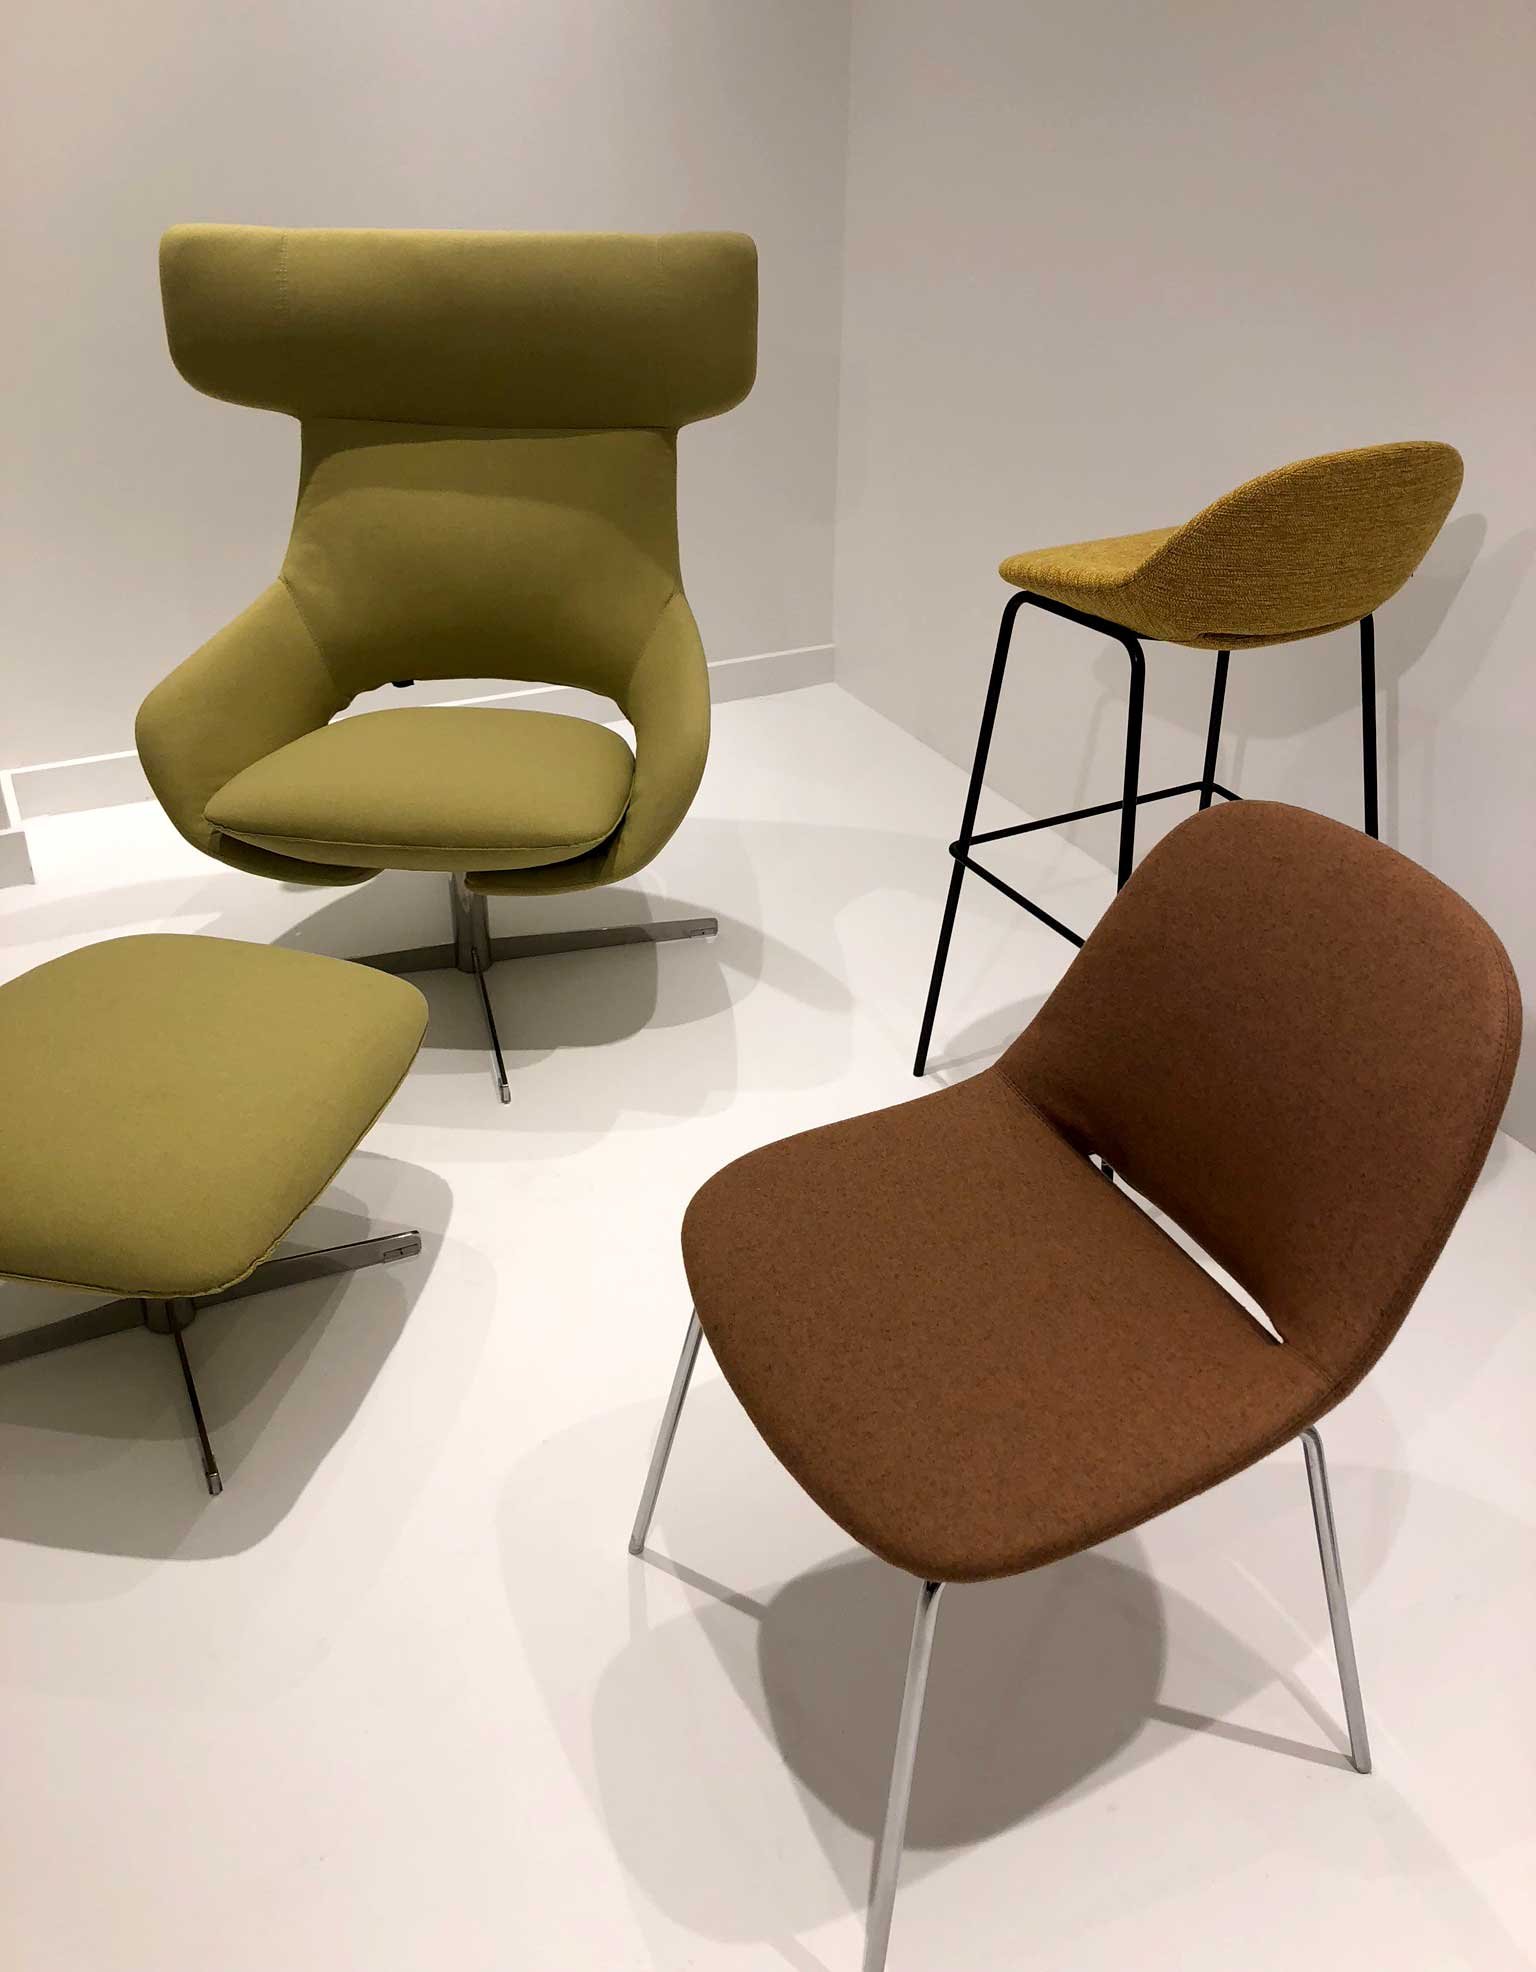 5 Trends We Saw at NeoCon 2018 from Unisource Solutions - Natural colors